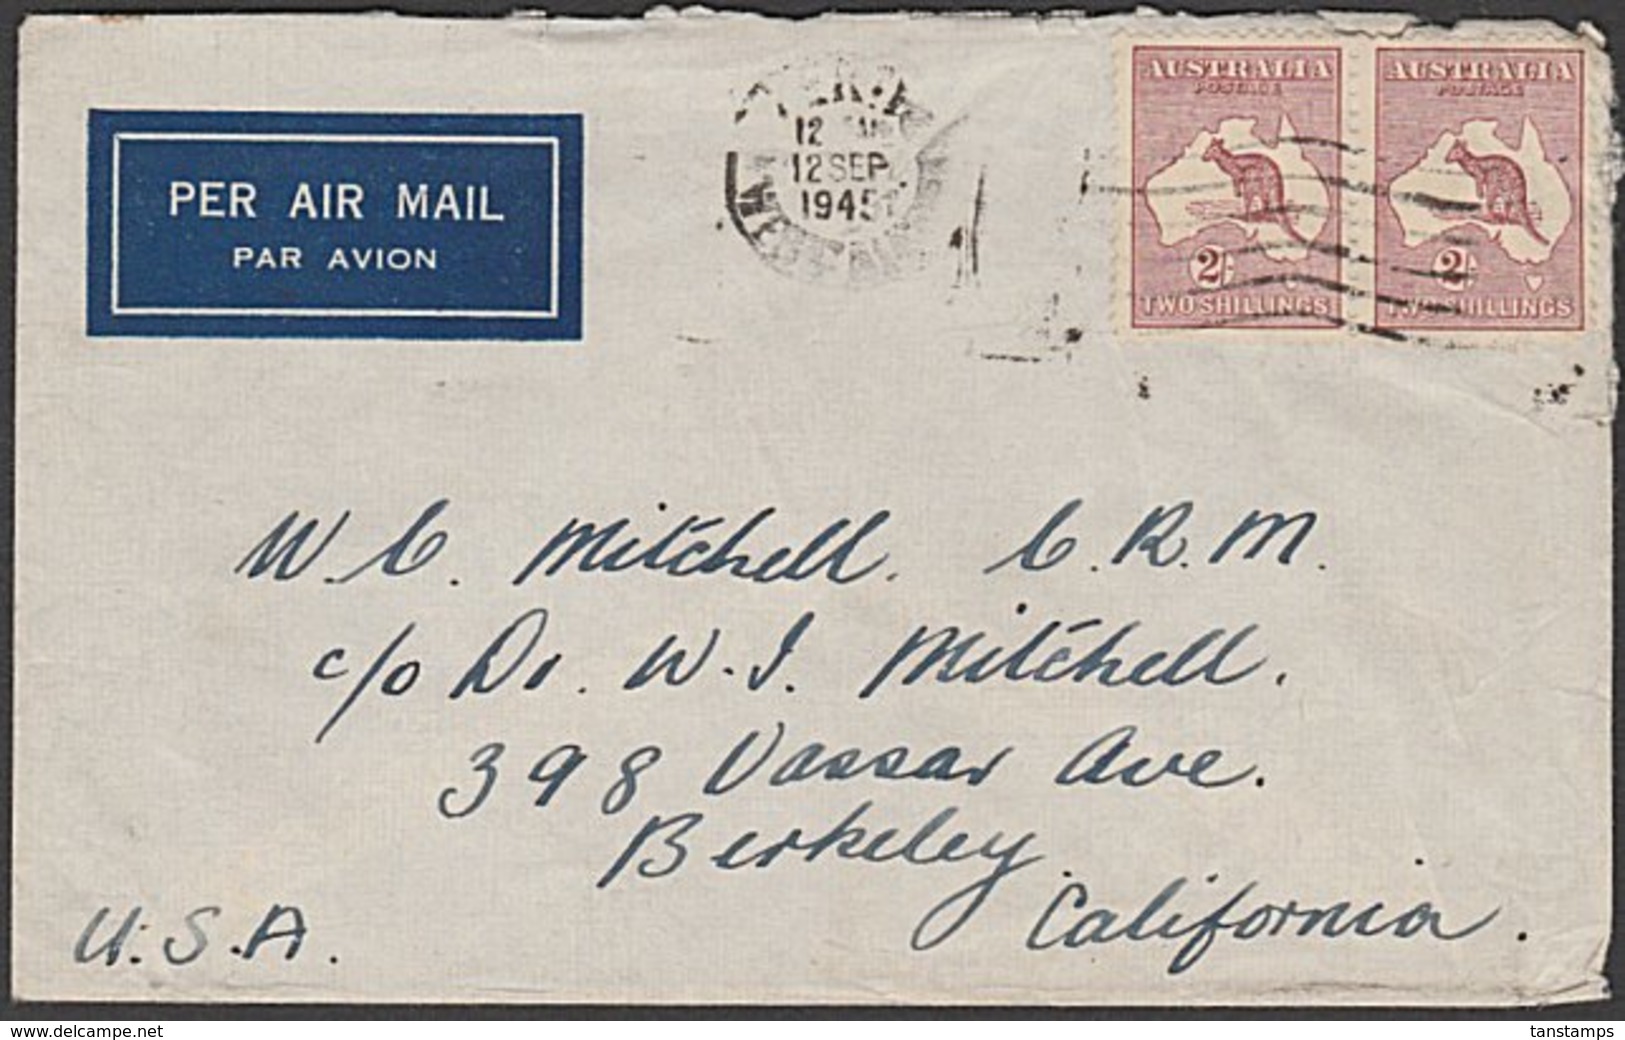 AUSTRALIA - USA 1945 ROO AIRMAIL COVER 4s RATE - Covers & Documents